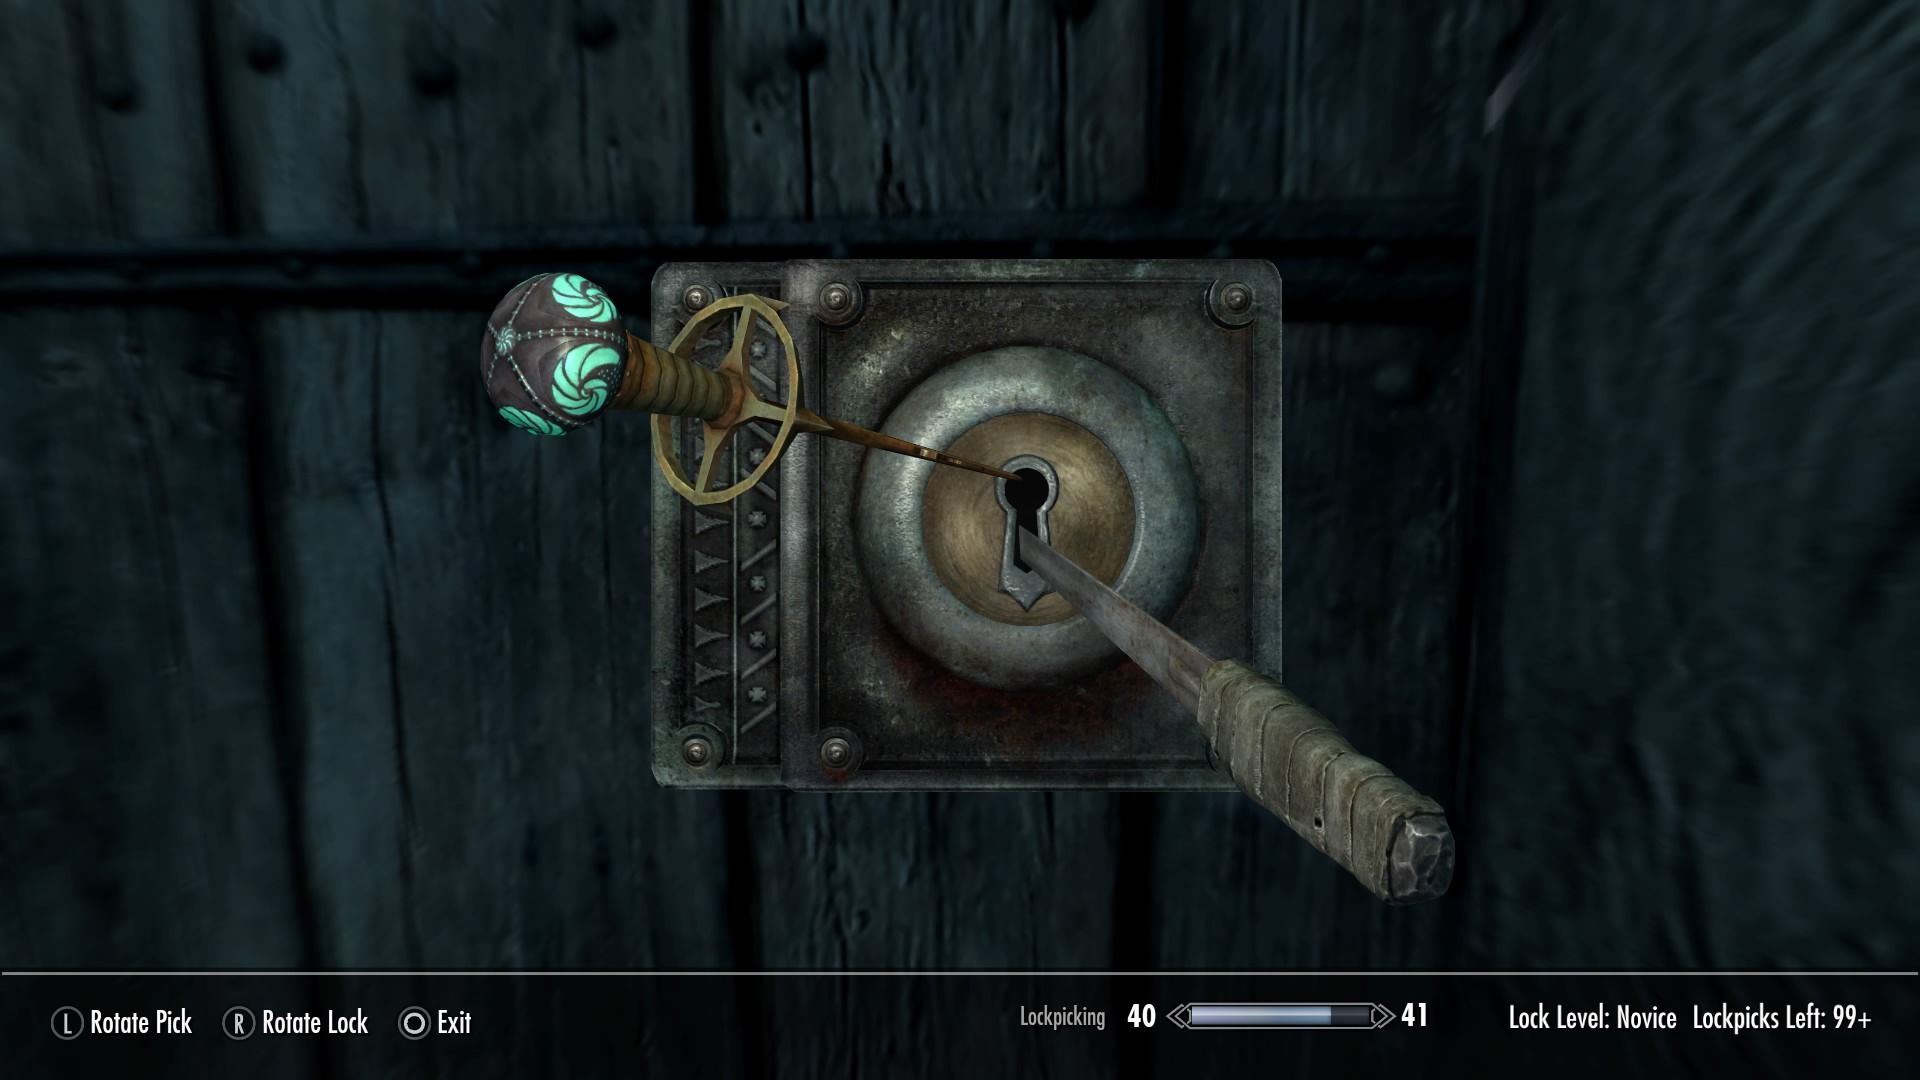 Picking a lock with the Skeleton Key in Skyrim